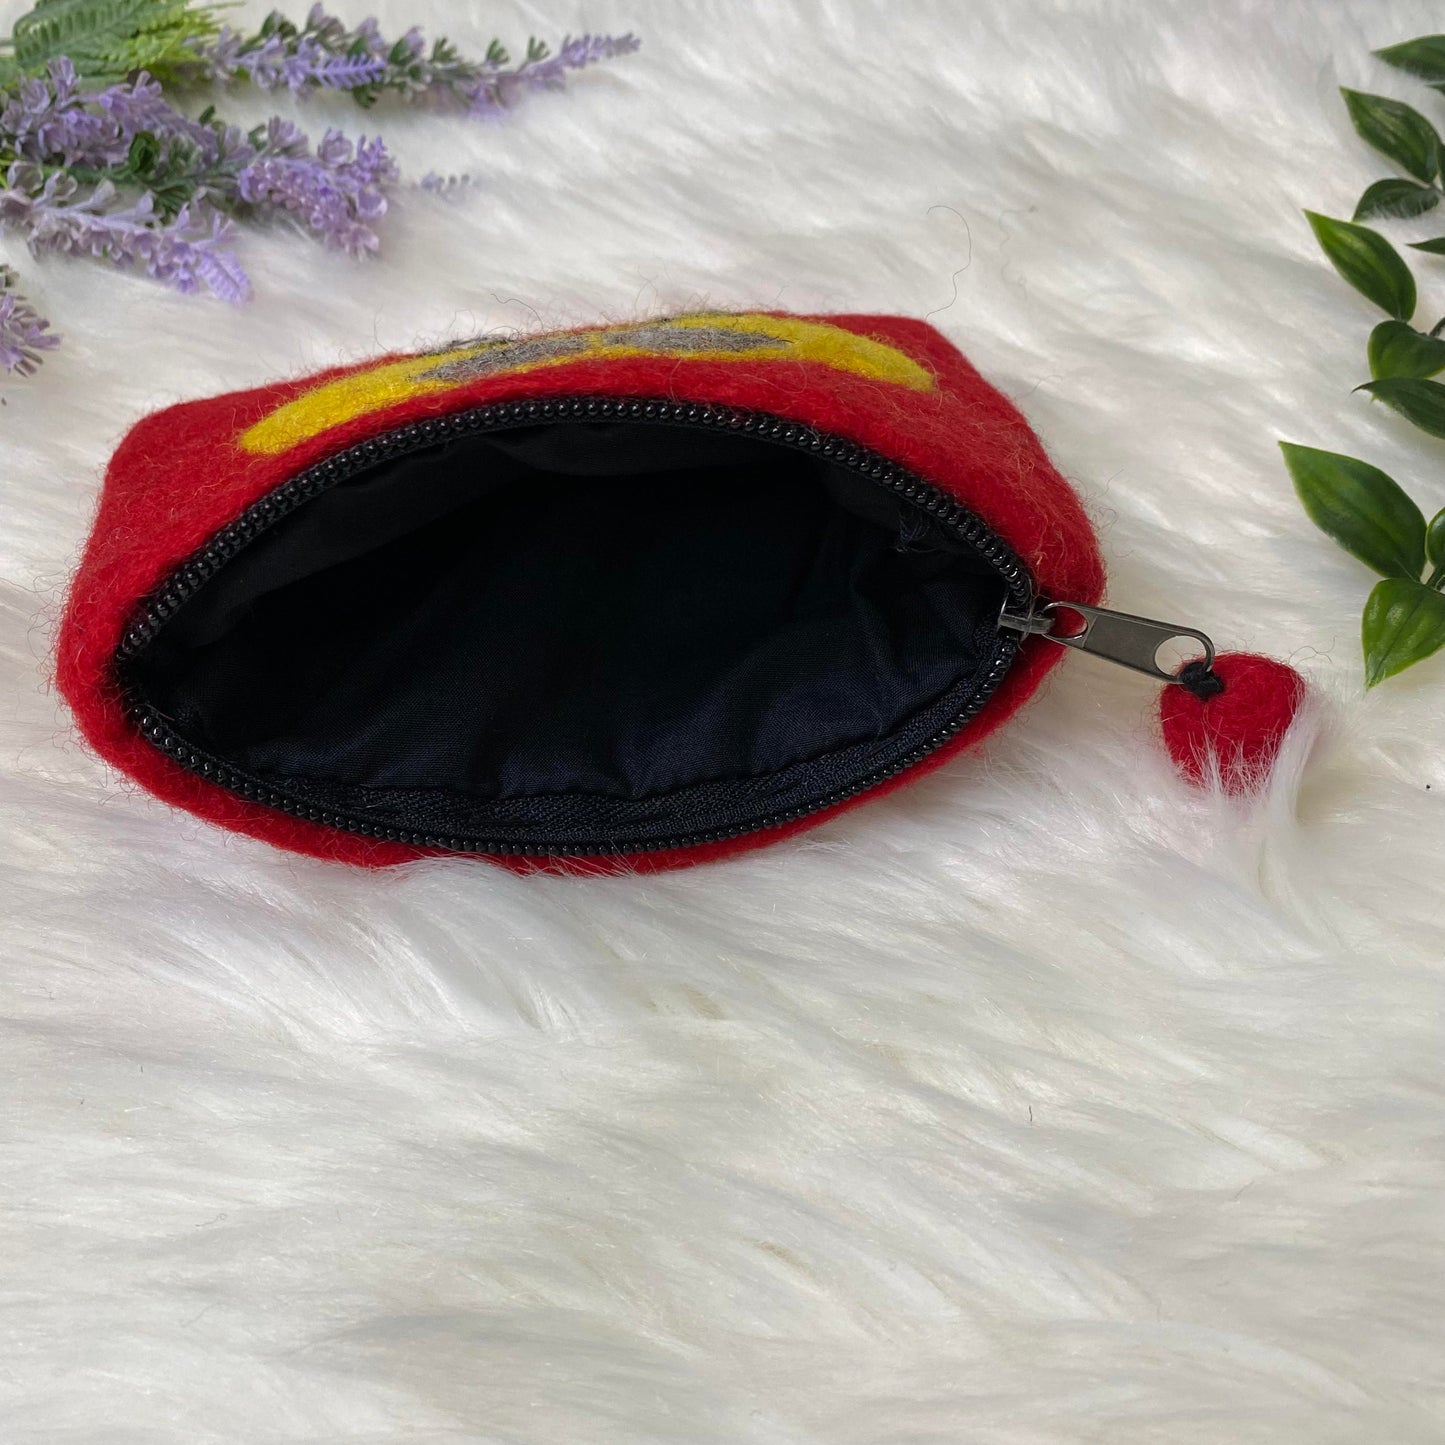 Car Designed Coin Purse For Kids